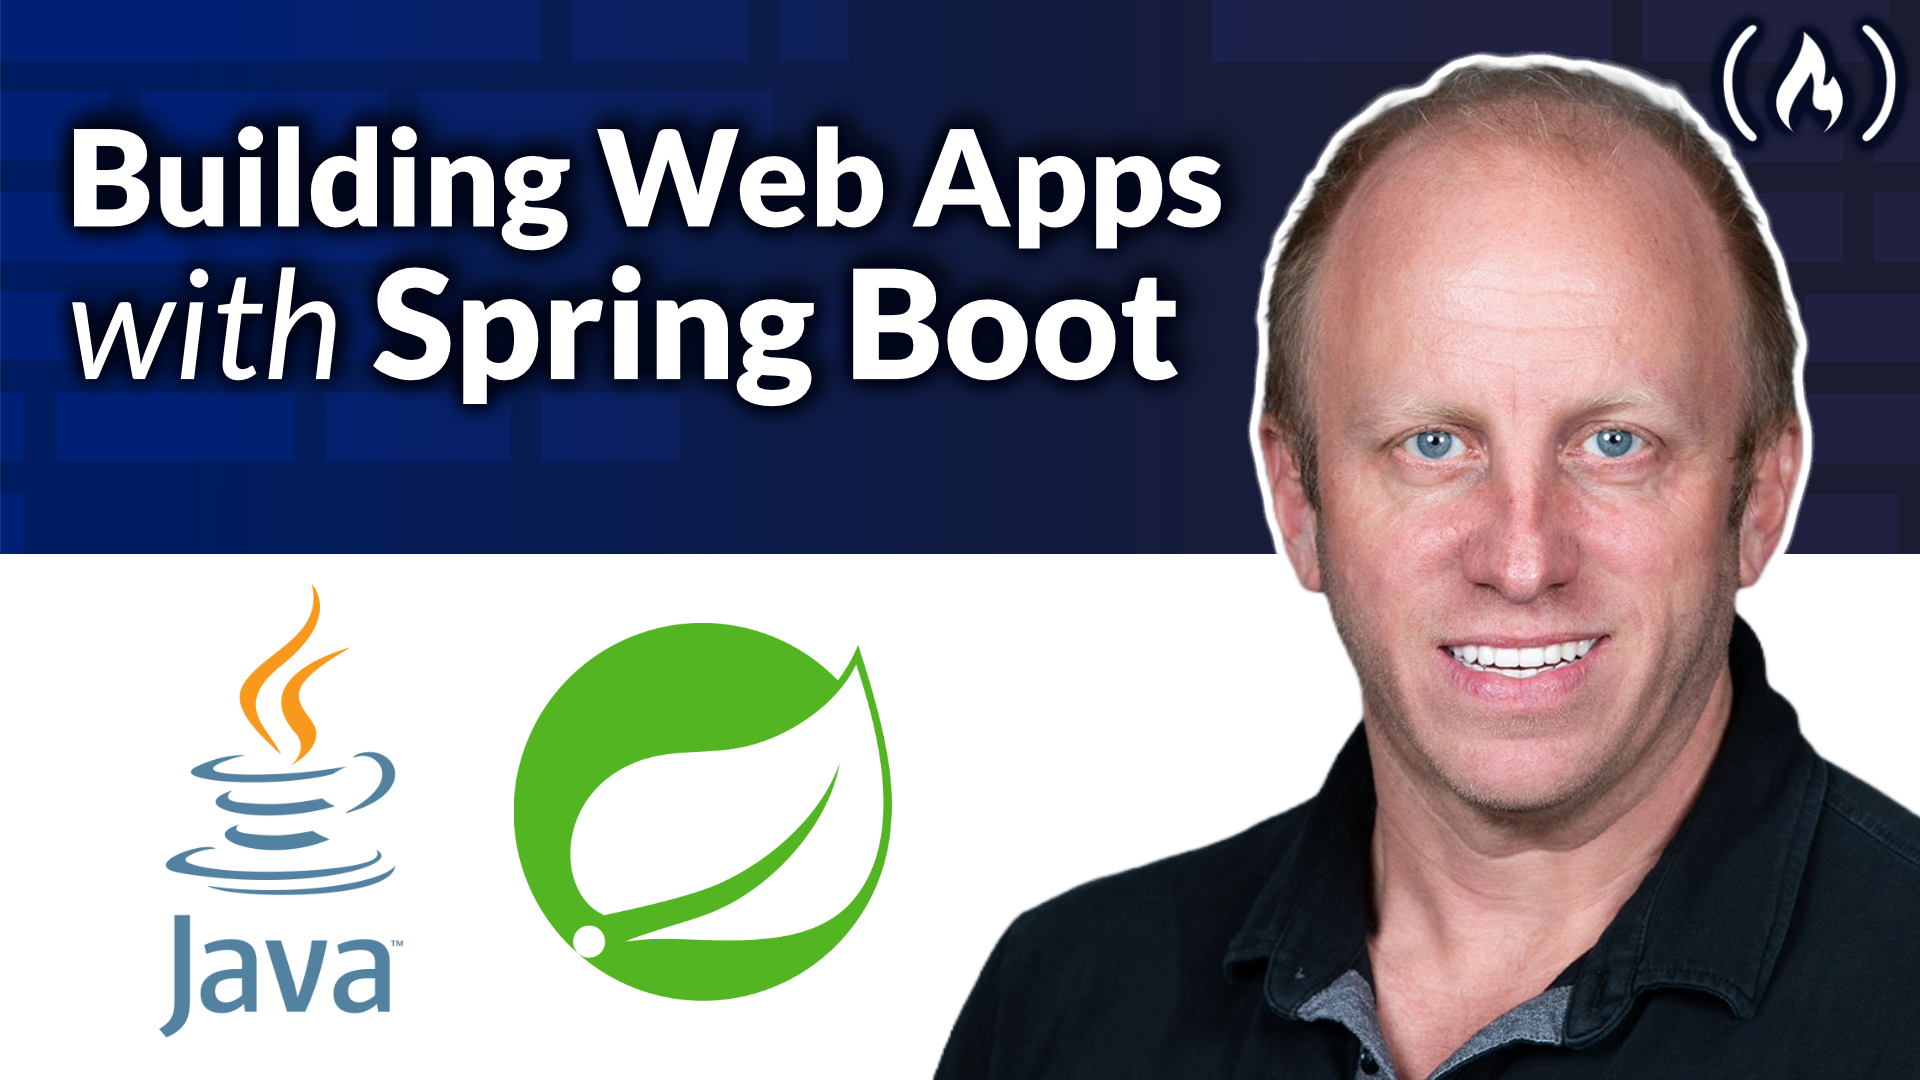 Image for Learn App Development with Spring Boot 3